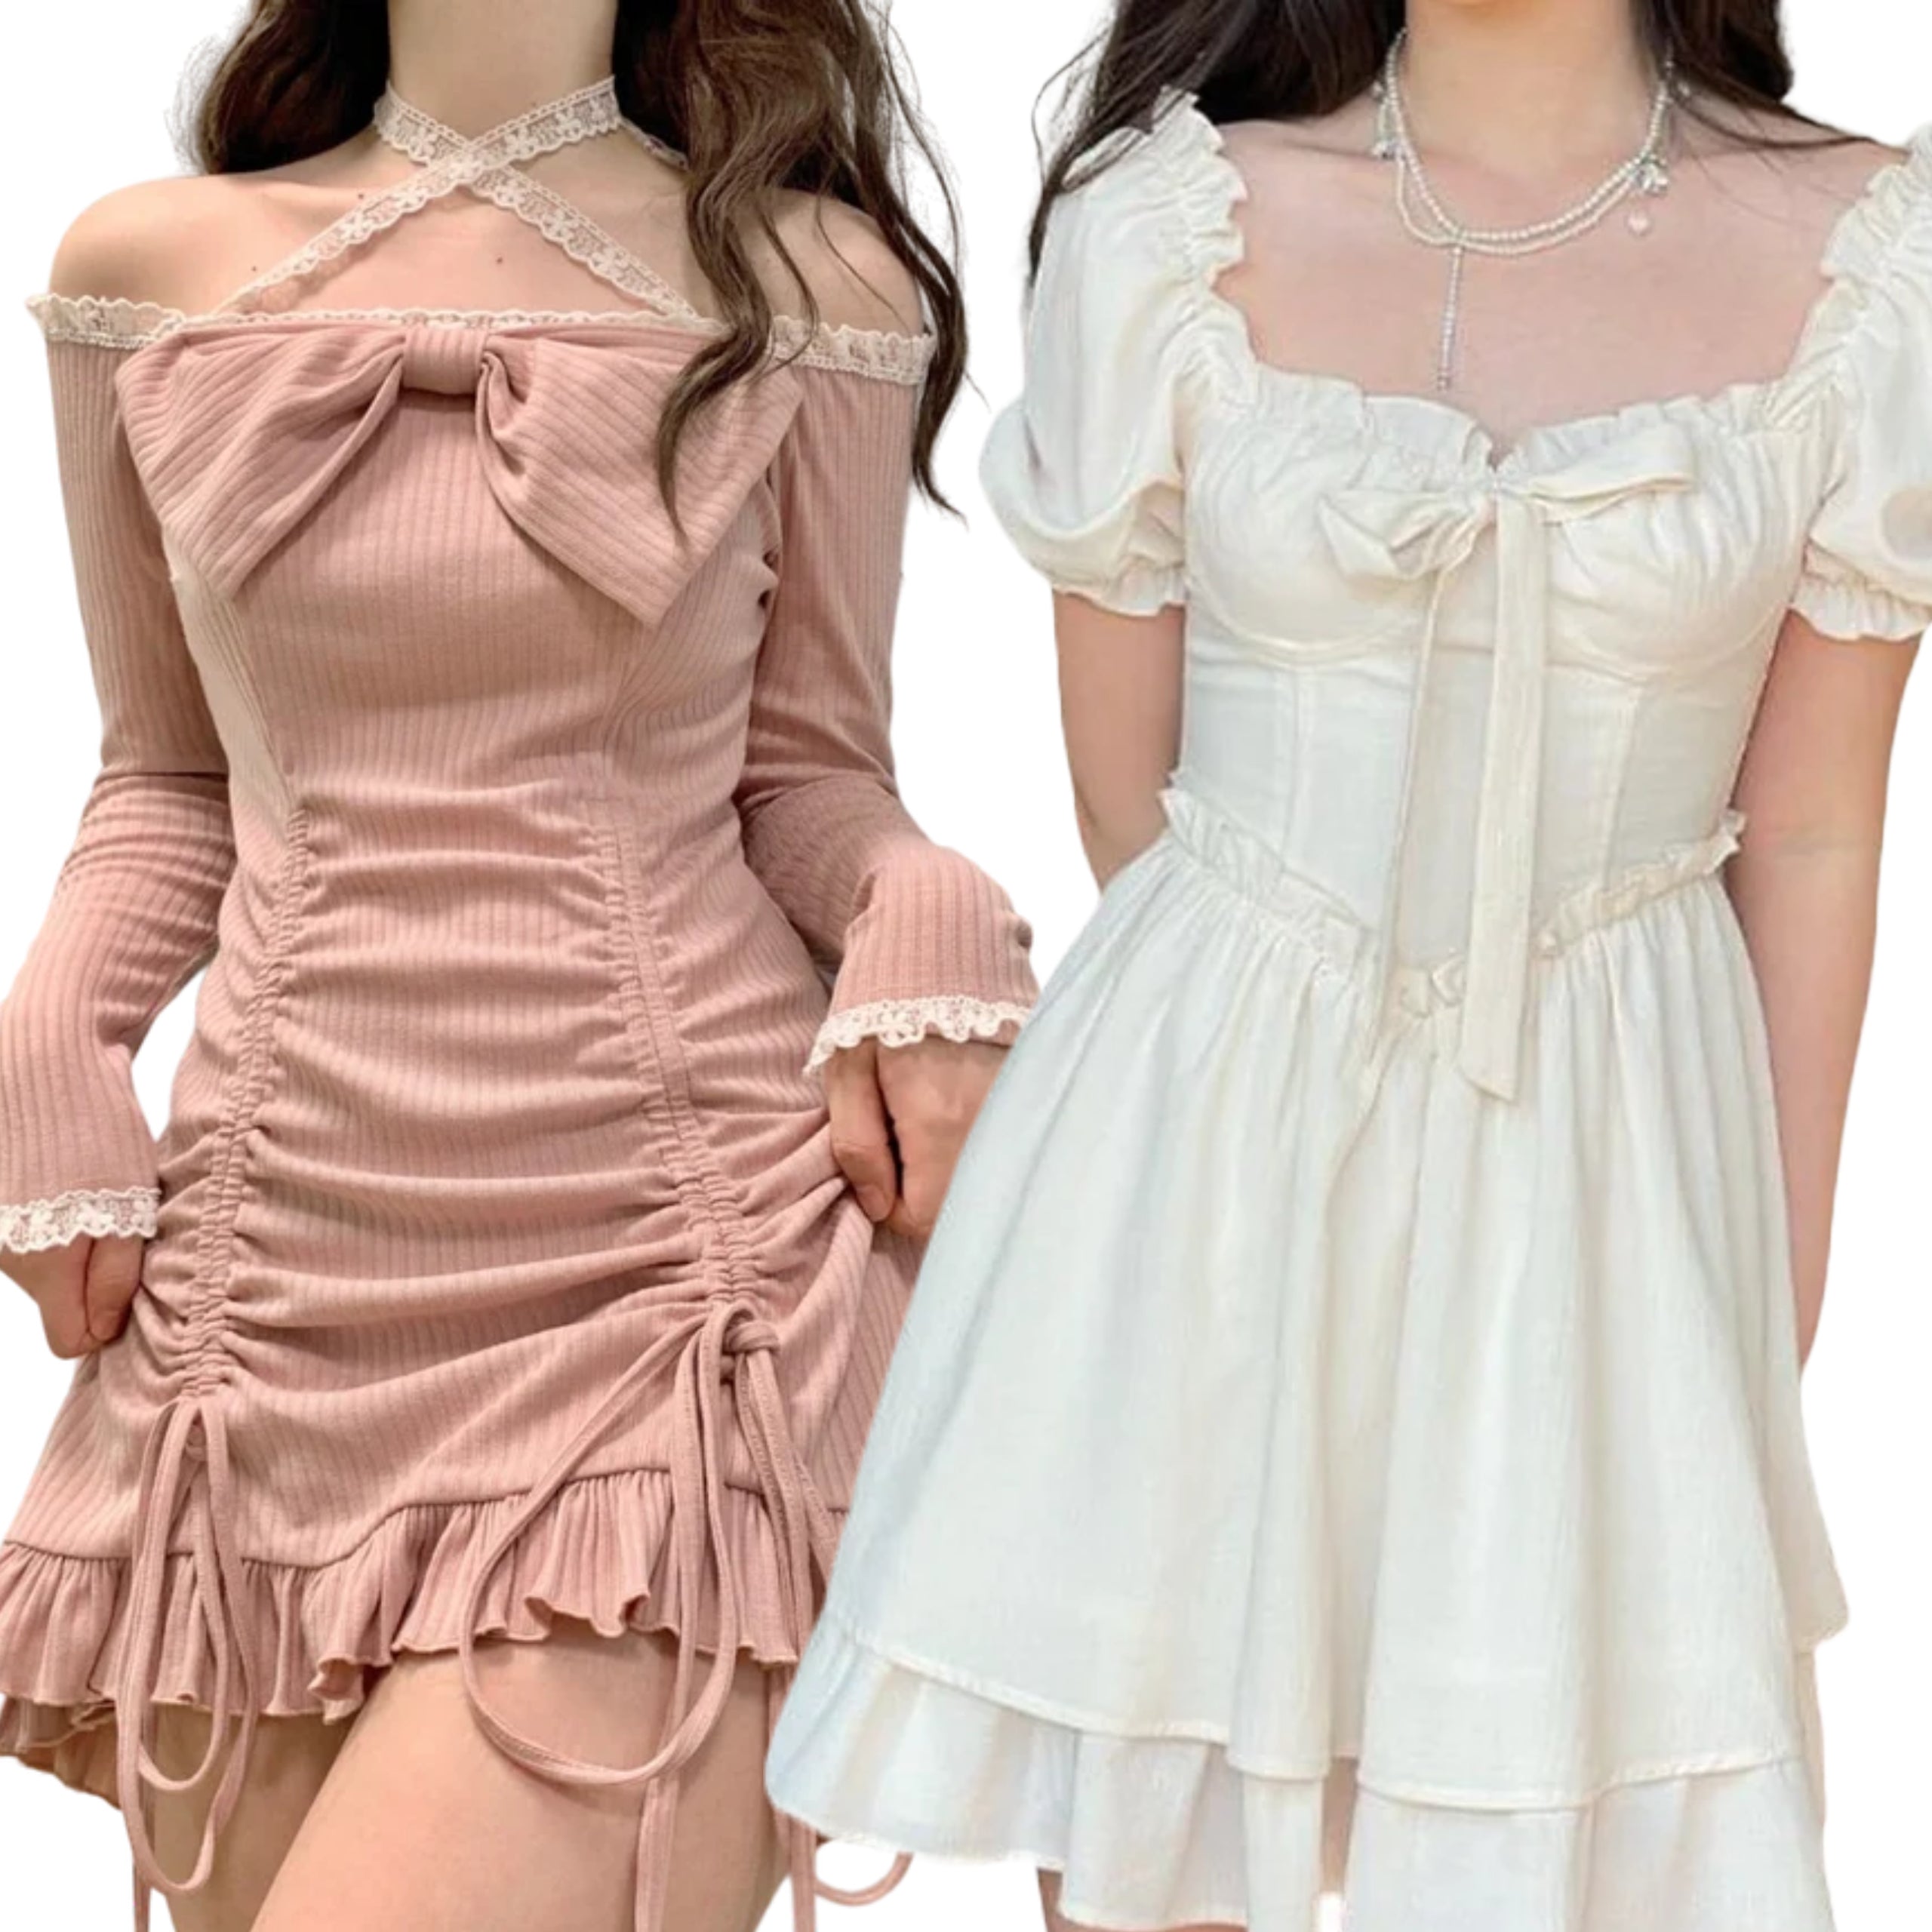 Coquette Aesthetic Clothes & Outfits - Shoptery